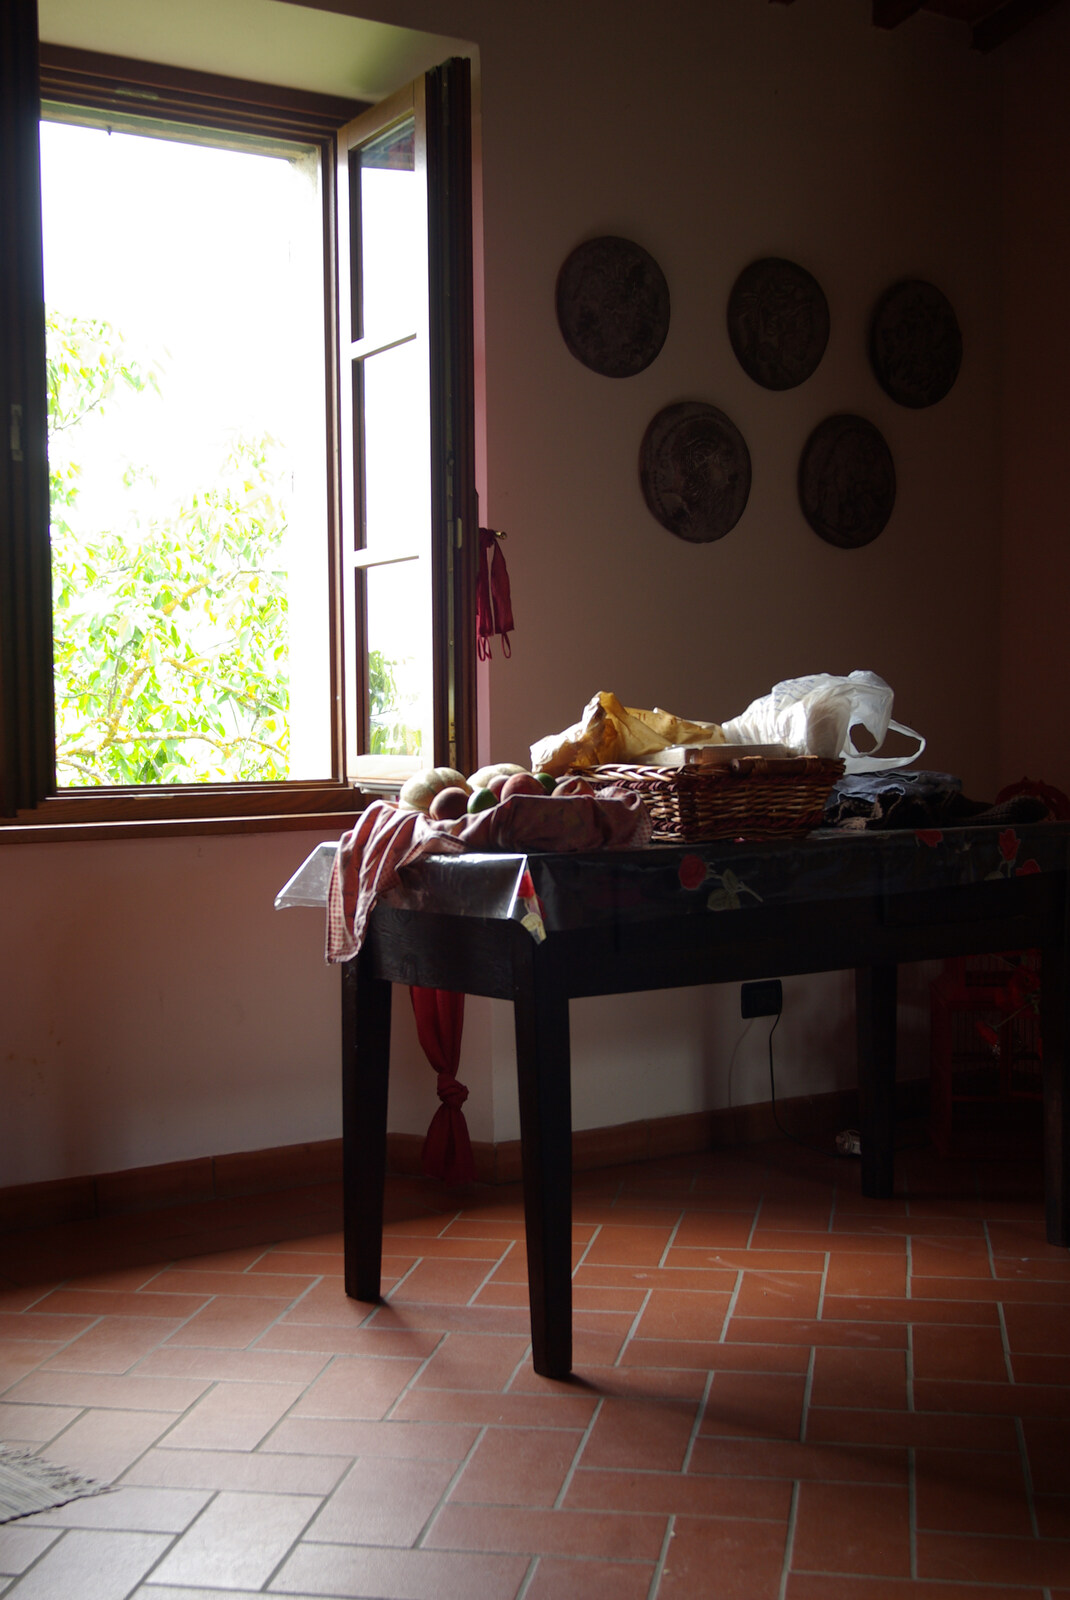 Tenuta Il Palazzo in Arezzo, Tuscany, Italy - 22nd July 2008: Table, fruit, and an open window